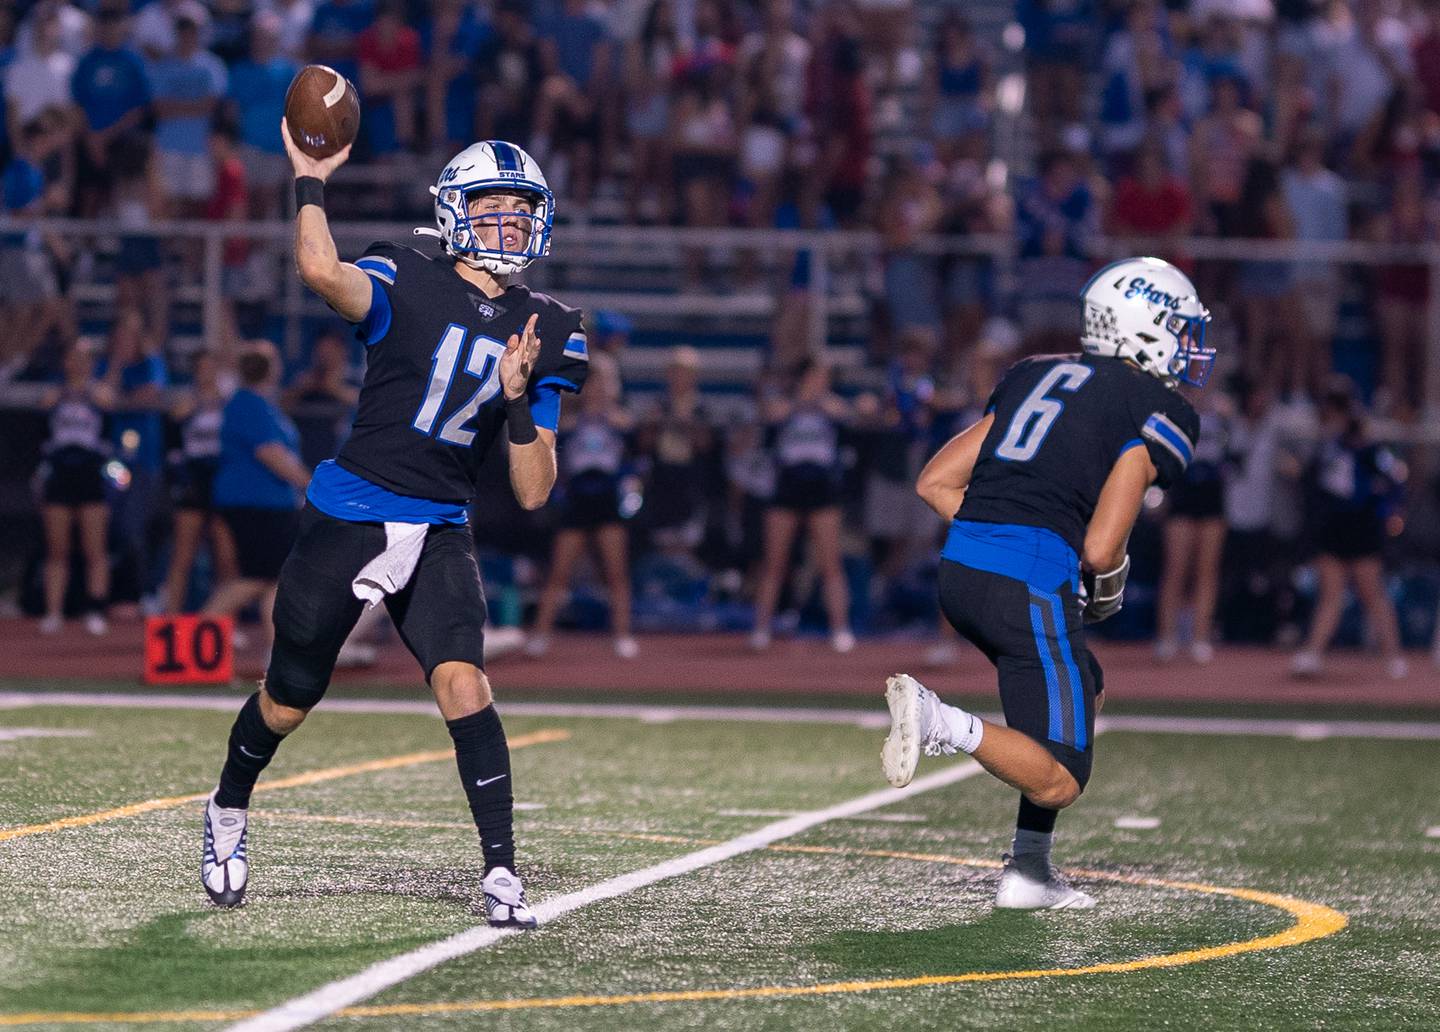 St. Charles North's Will Vaske (12) throws a pass against Lake Zurich during a football game at St. Charles North High School on Friday, Sep 2, 2022.